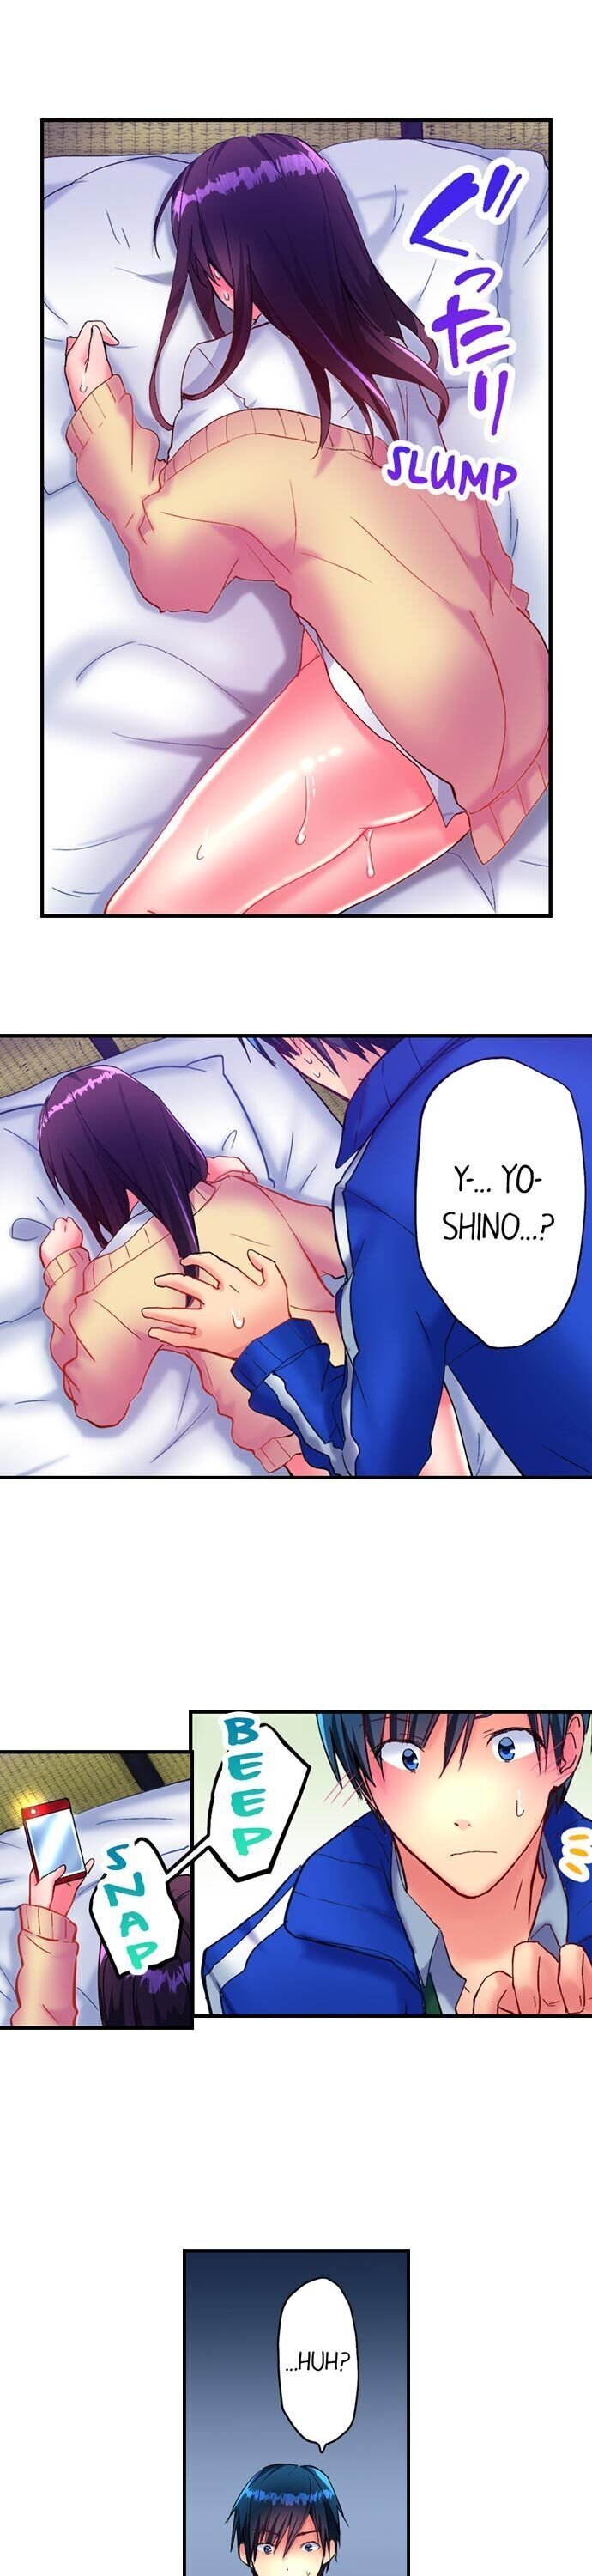 hot-sex-in-the-winter-chap-3-12